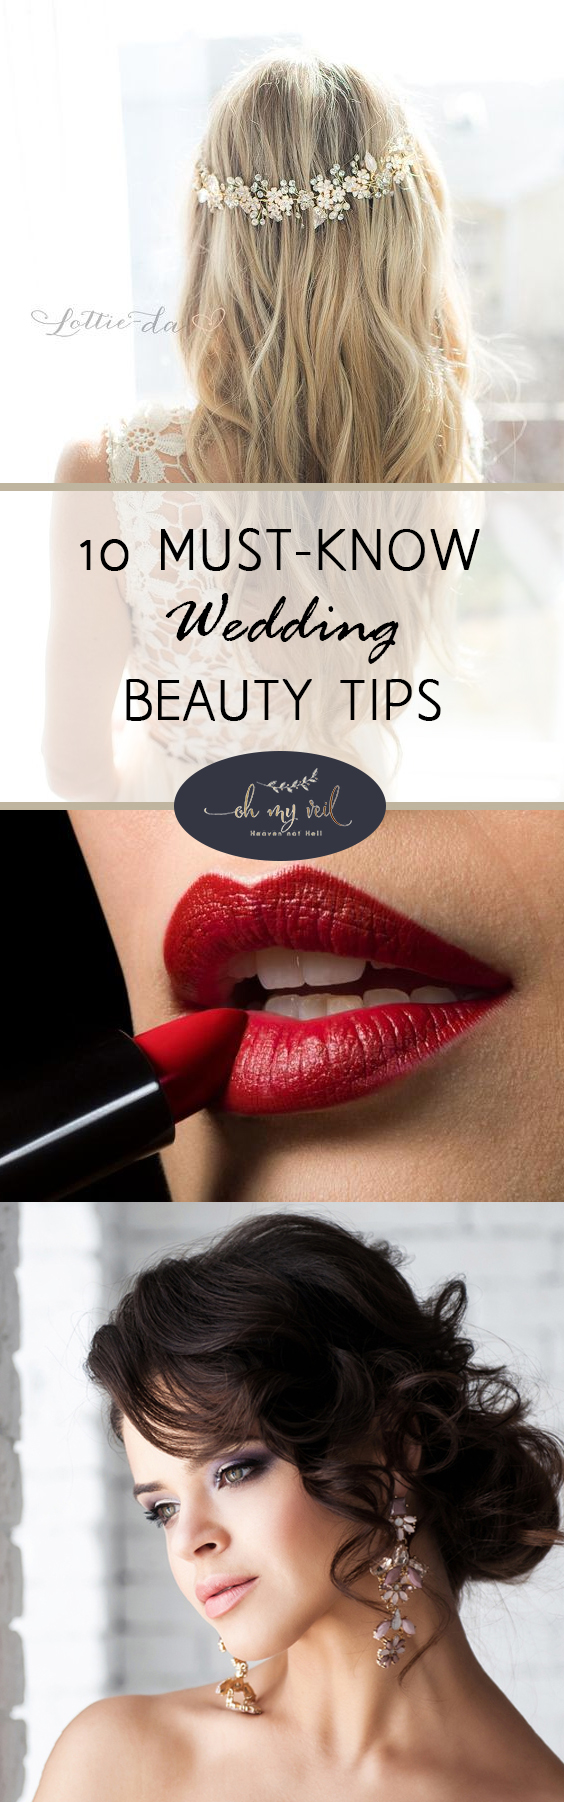 Wedding Beauty, Wedding Beauty Tips, Beauty Tips for Your Wedding, How to Look Your Best on Your Wedding Day, Wedding Day Beauty Hacks, Popular